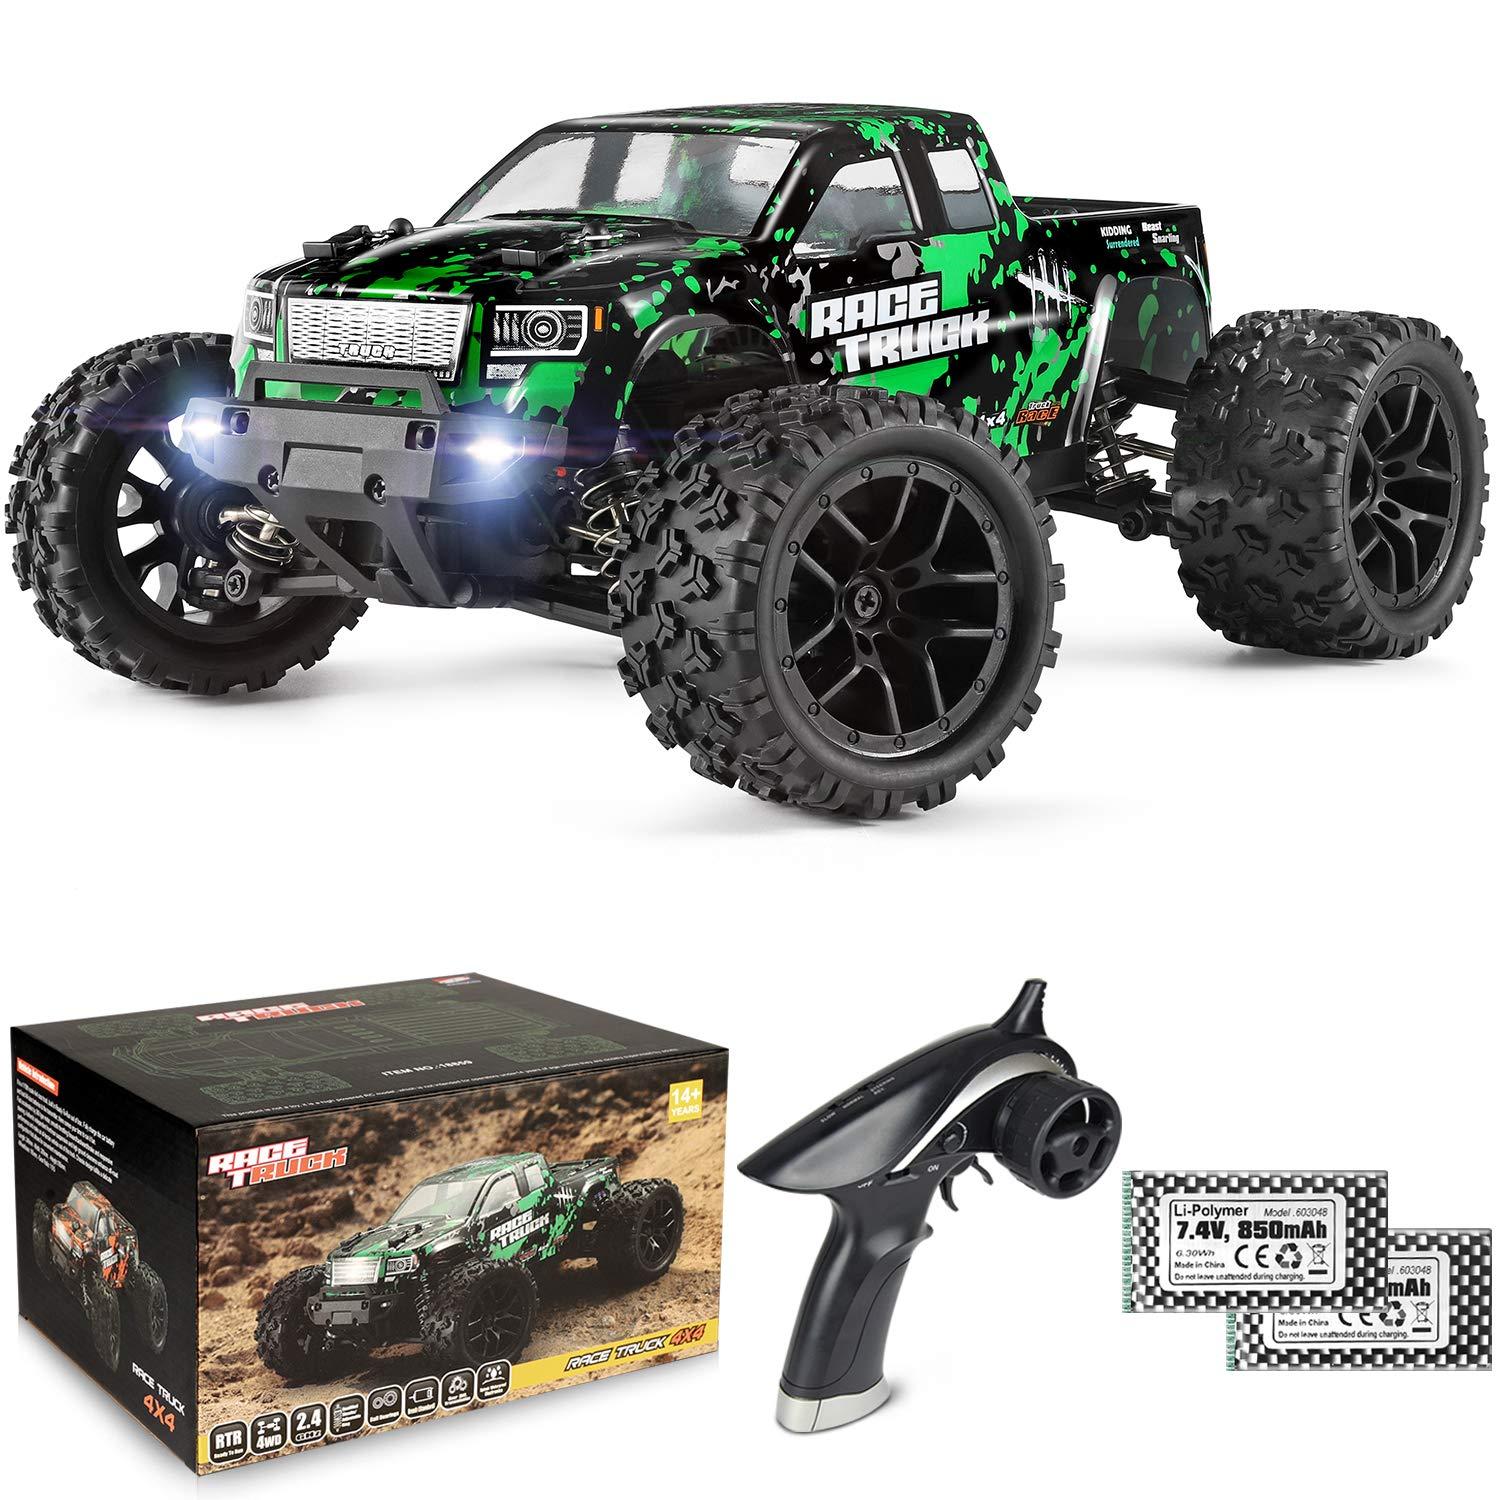 Rc Car 4X4 High Speed: Provide tips on what to consider when buying an RC car 4x4 high speed.